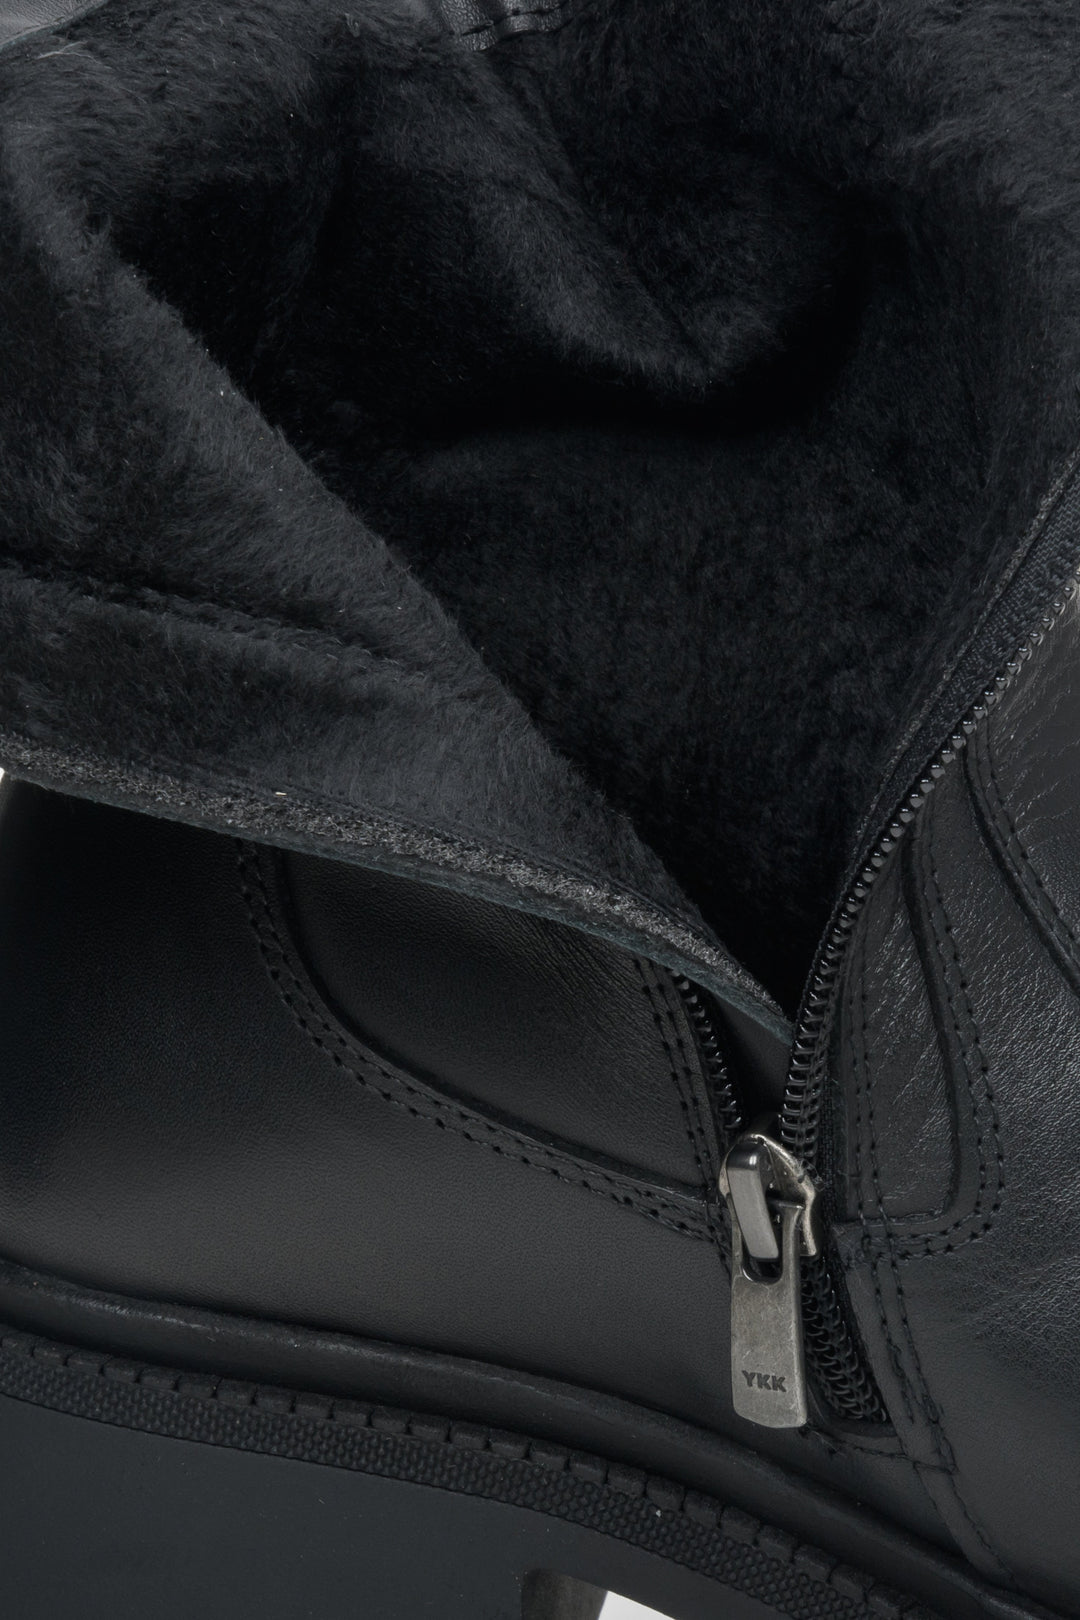 Women's black leather boots with a soft lining - close-up into the interior of the boot.